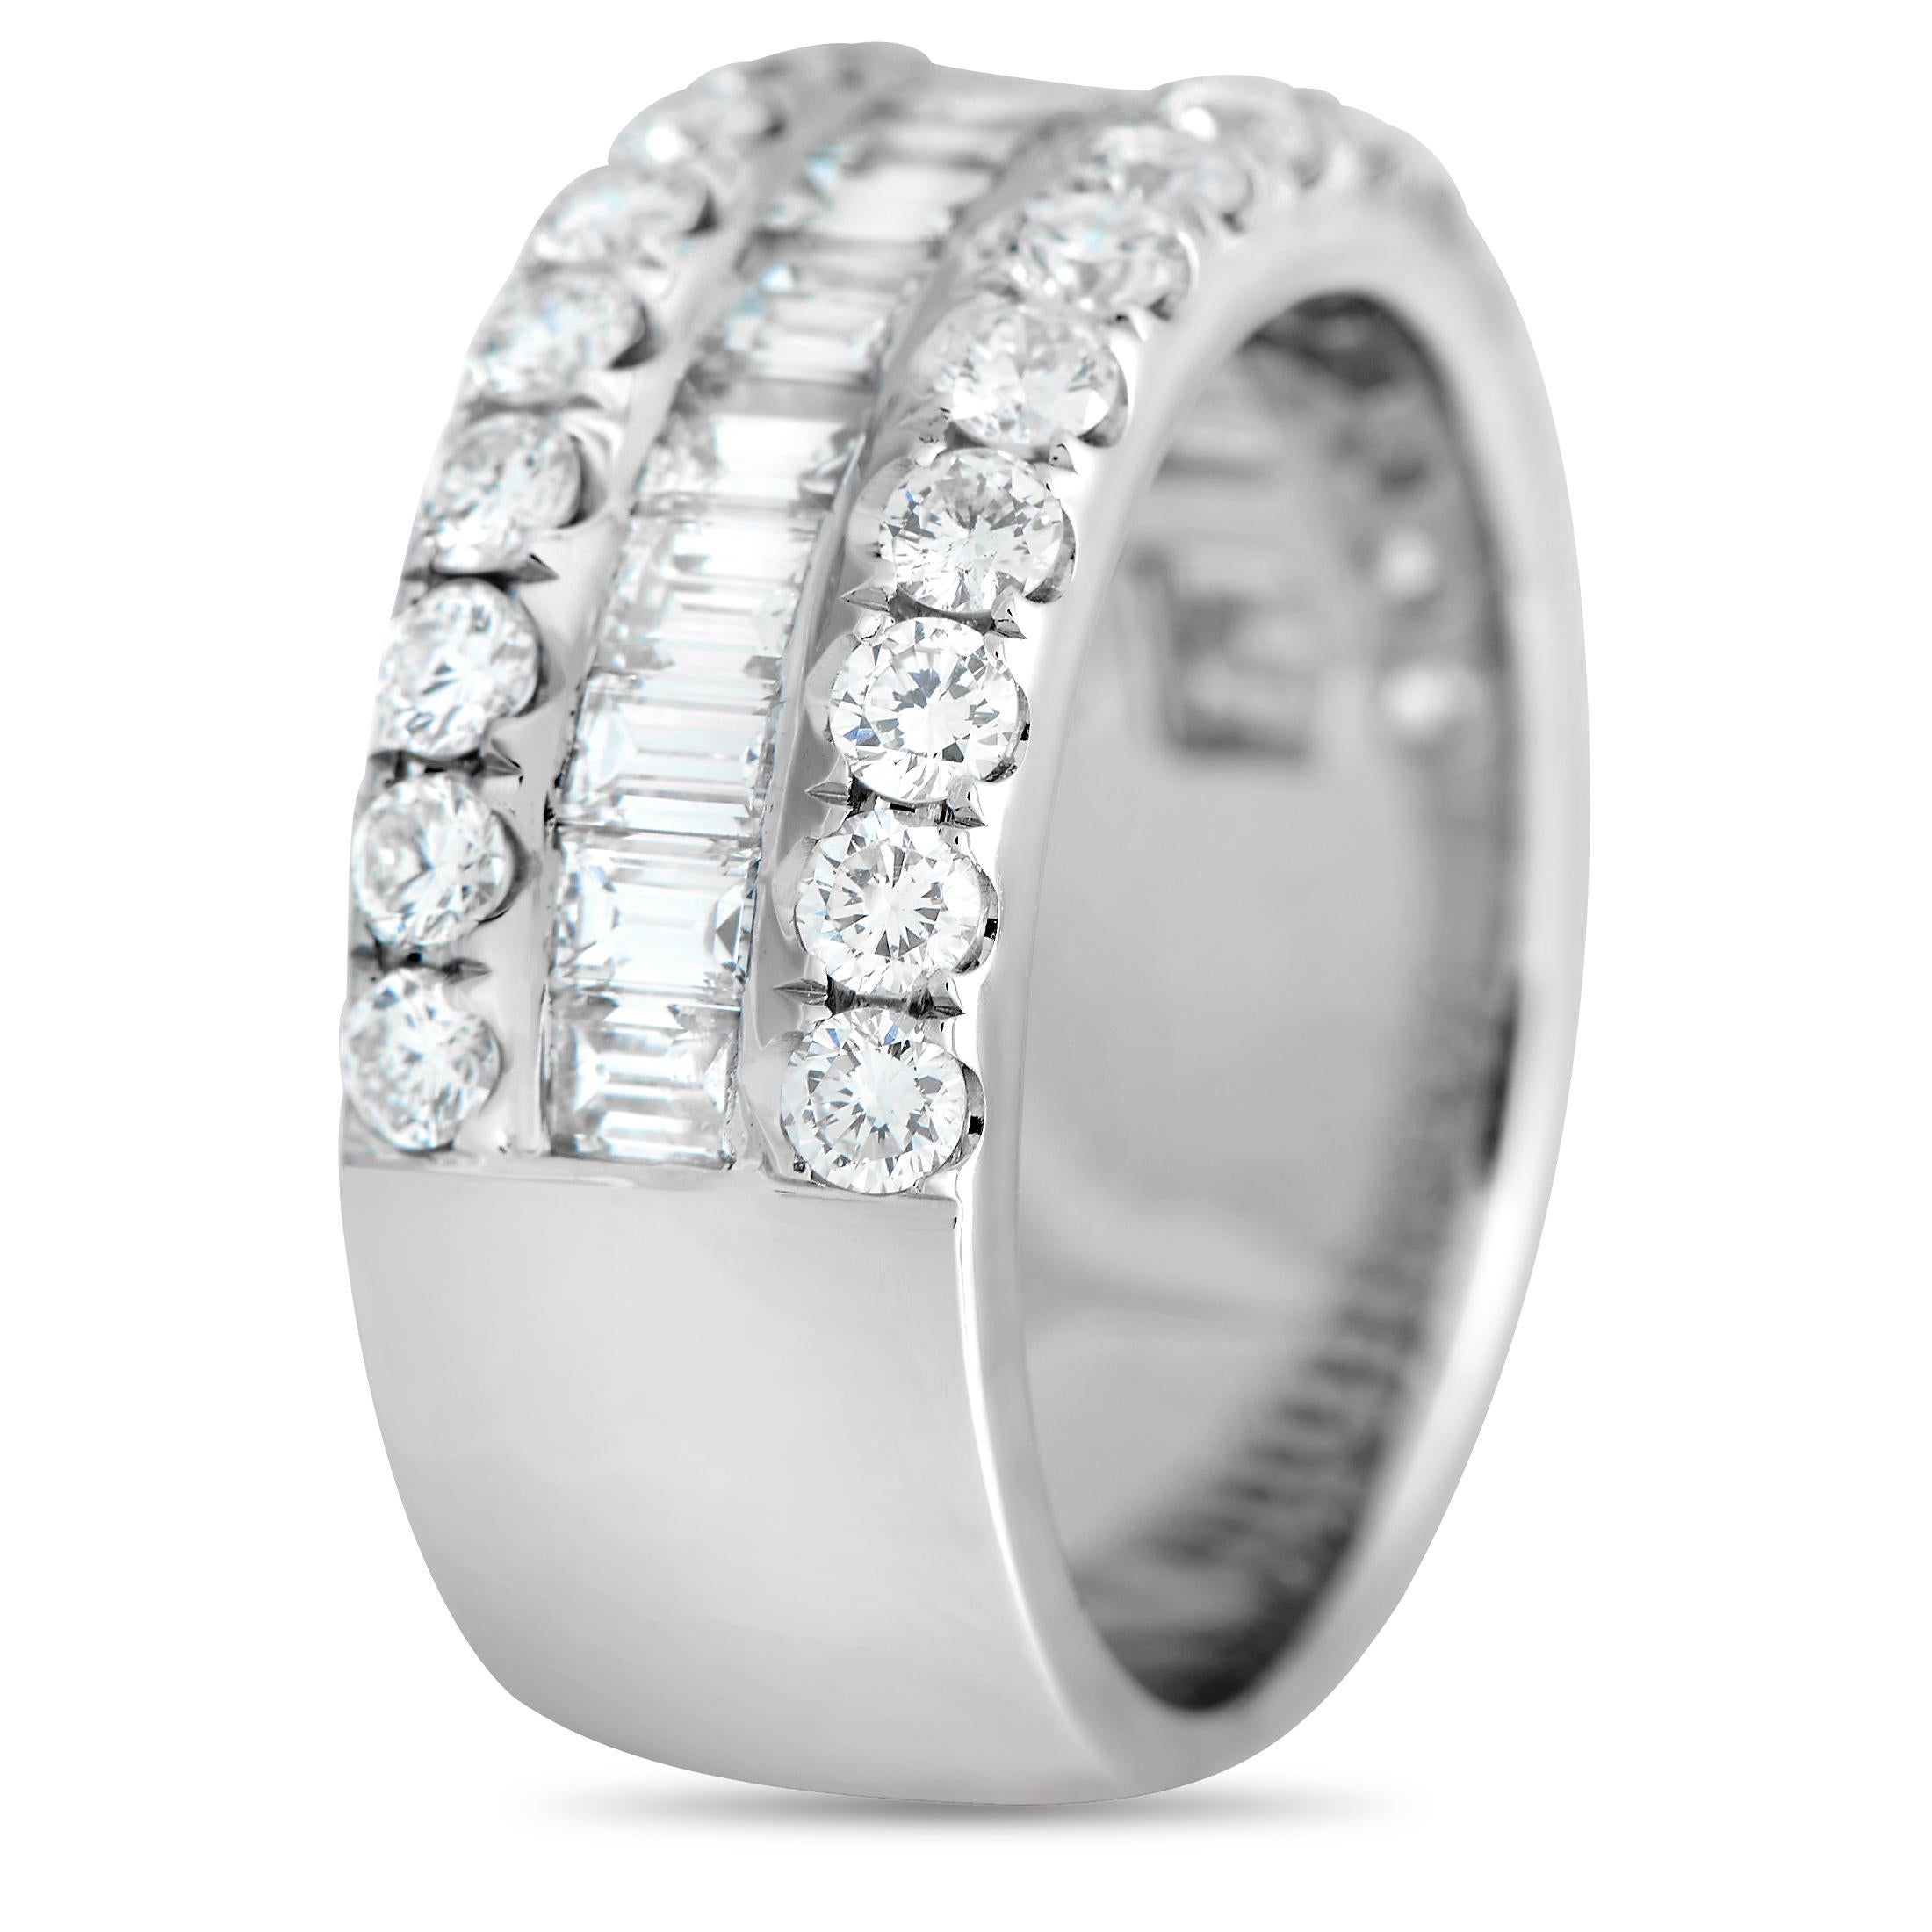 This ring is nothing short of elegant. It has a 7mm-thick band in 18K white gold, traced at the top center with channel-set step-cut diamonds. The edges are traced with rows of round diamonds that shine with poised sparkle. The ring's top dimensions